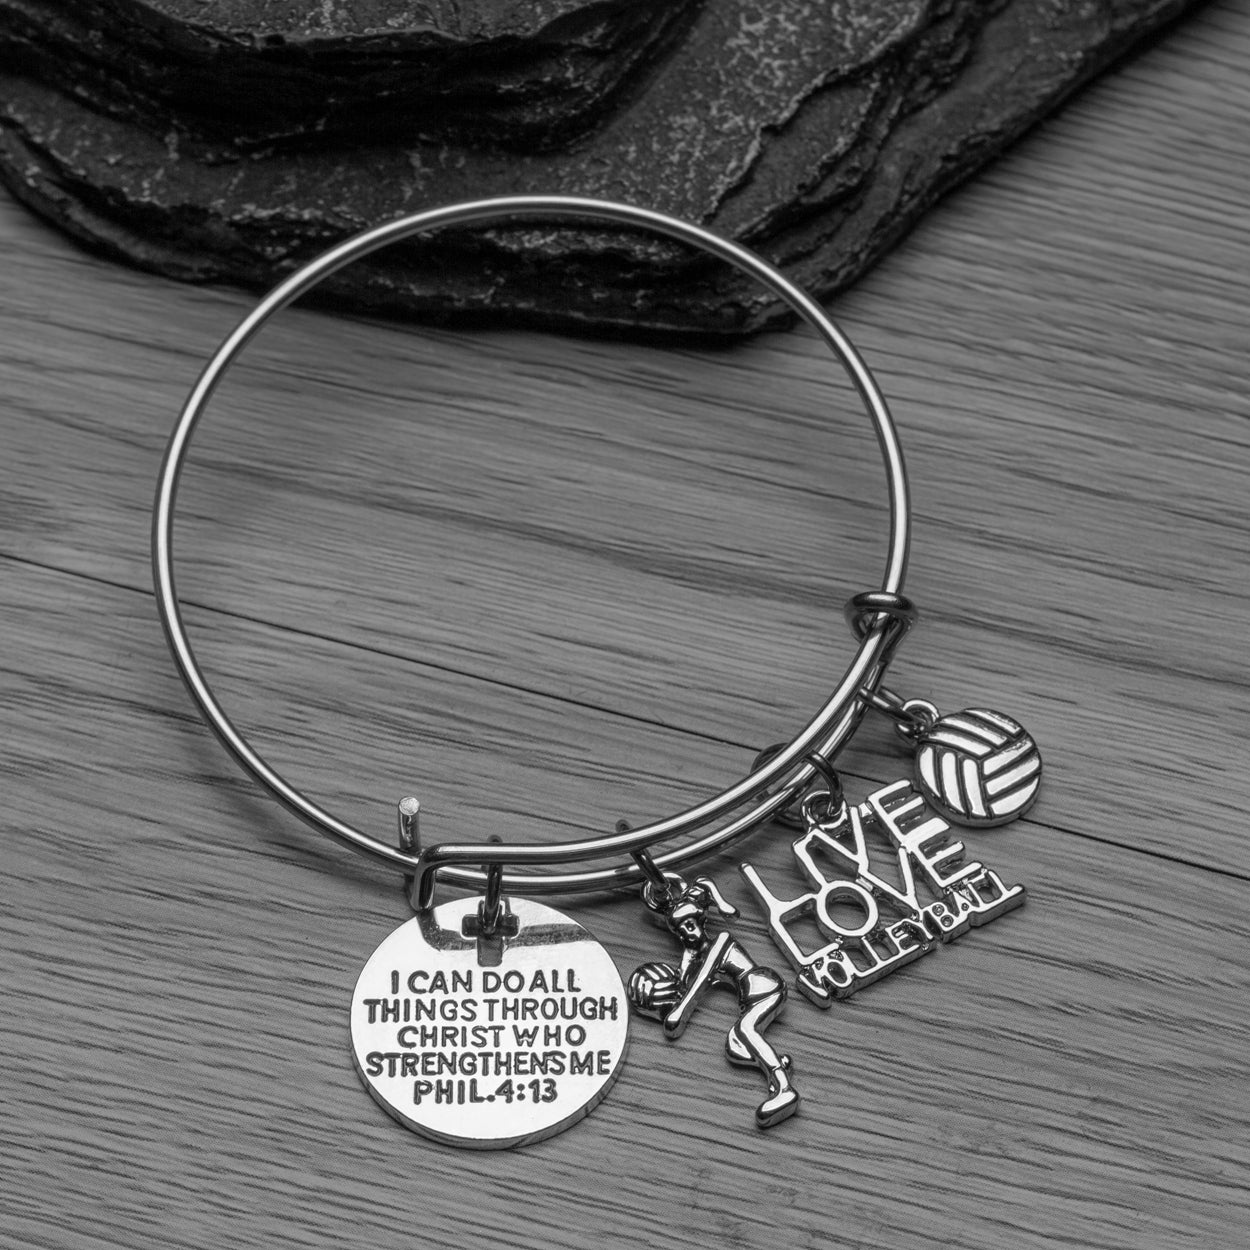 Volleyball Bracelet, I Can Do All Things Through Christ Who Strengthens Me Phil. 4:13 Scripture Jewelry